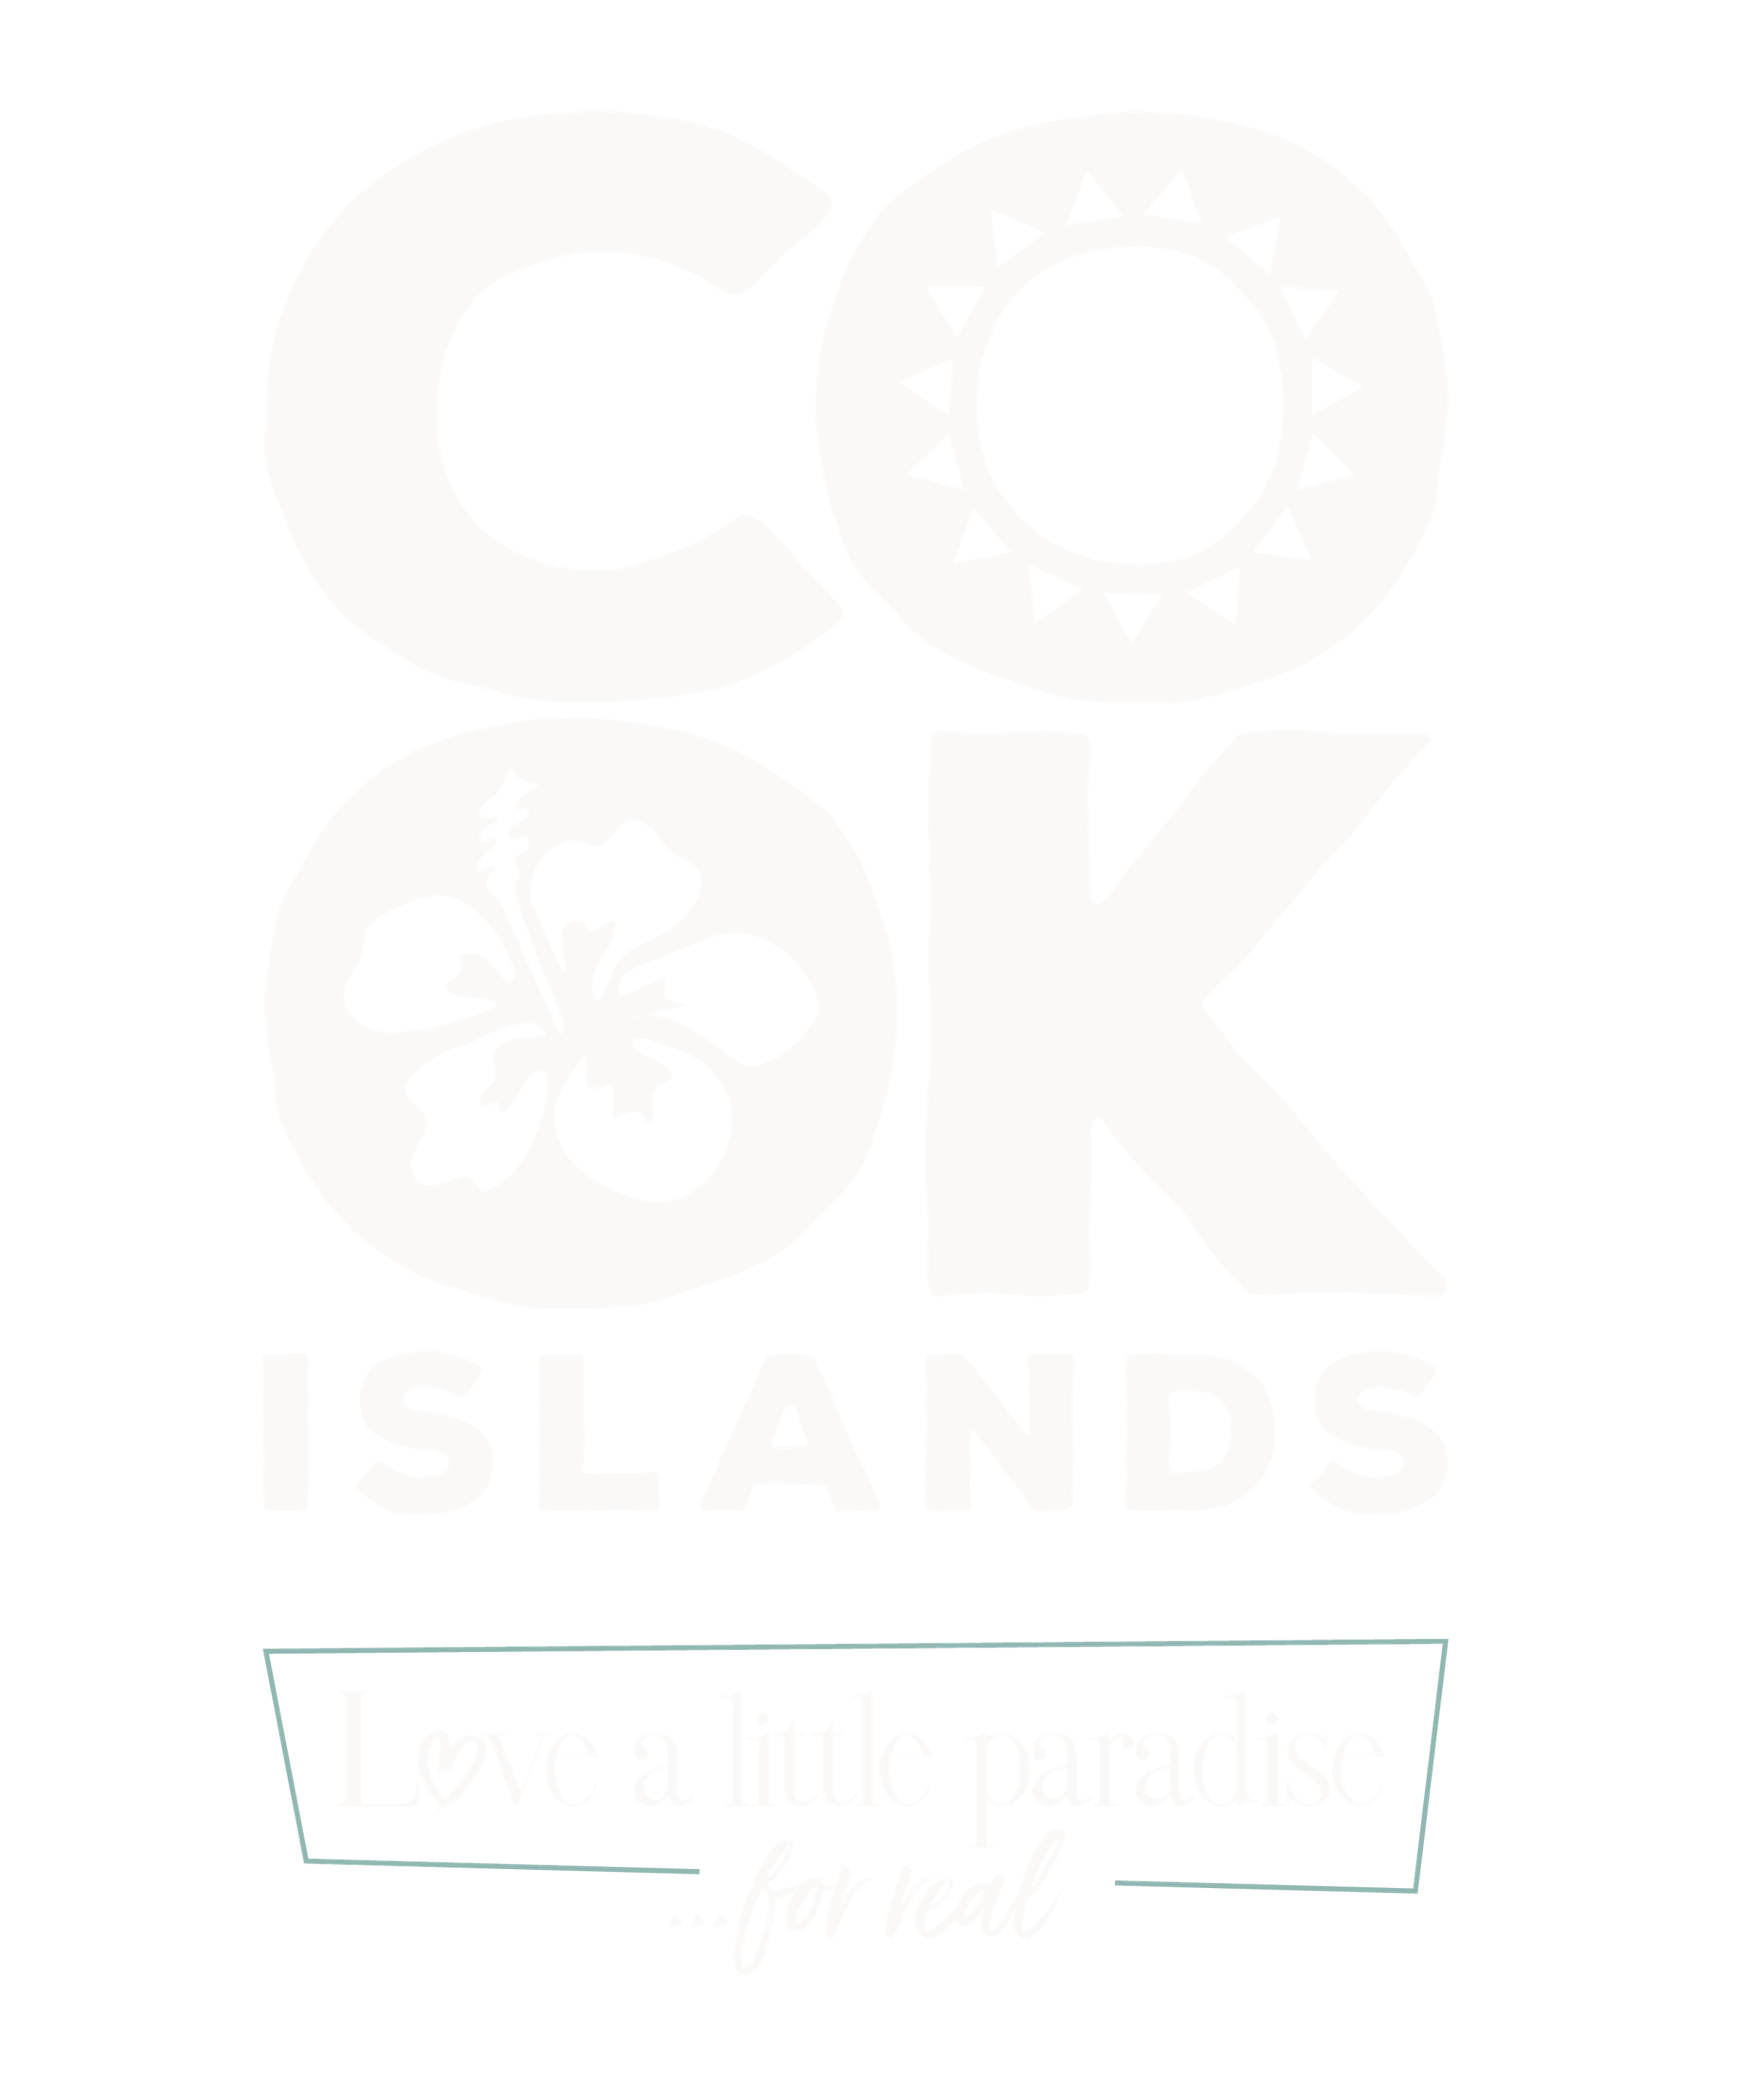 Go to Cook Islands Style Guide